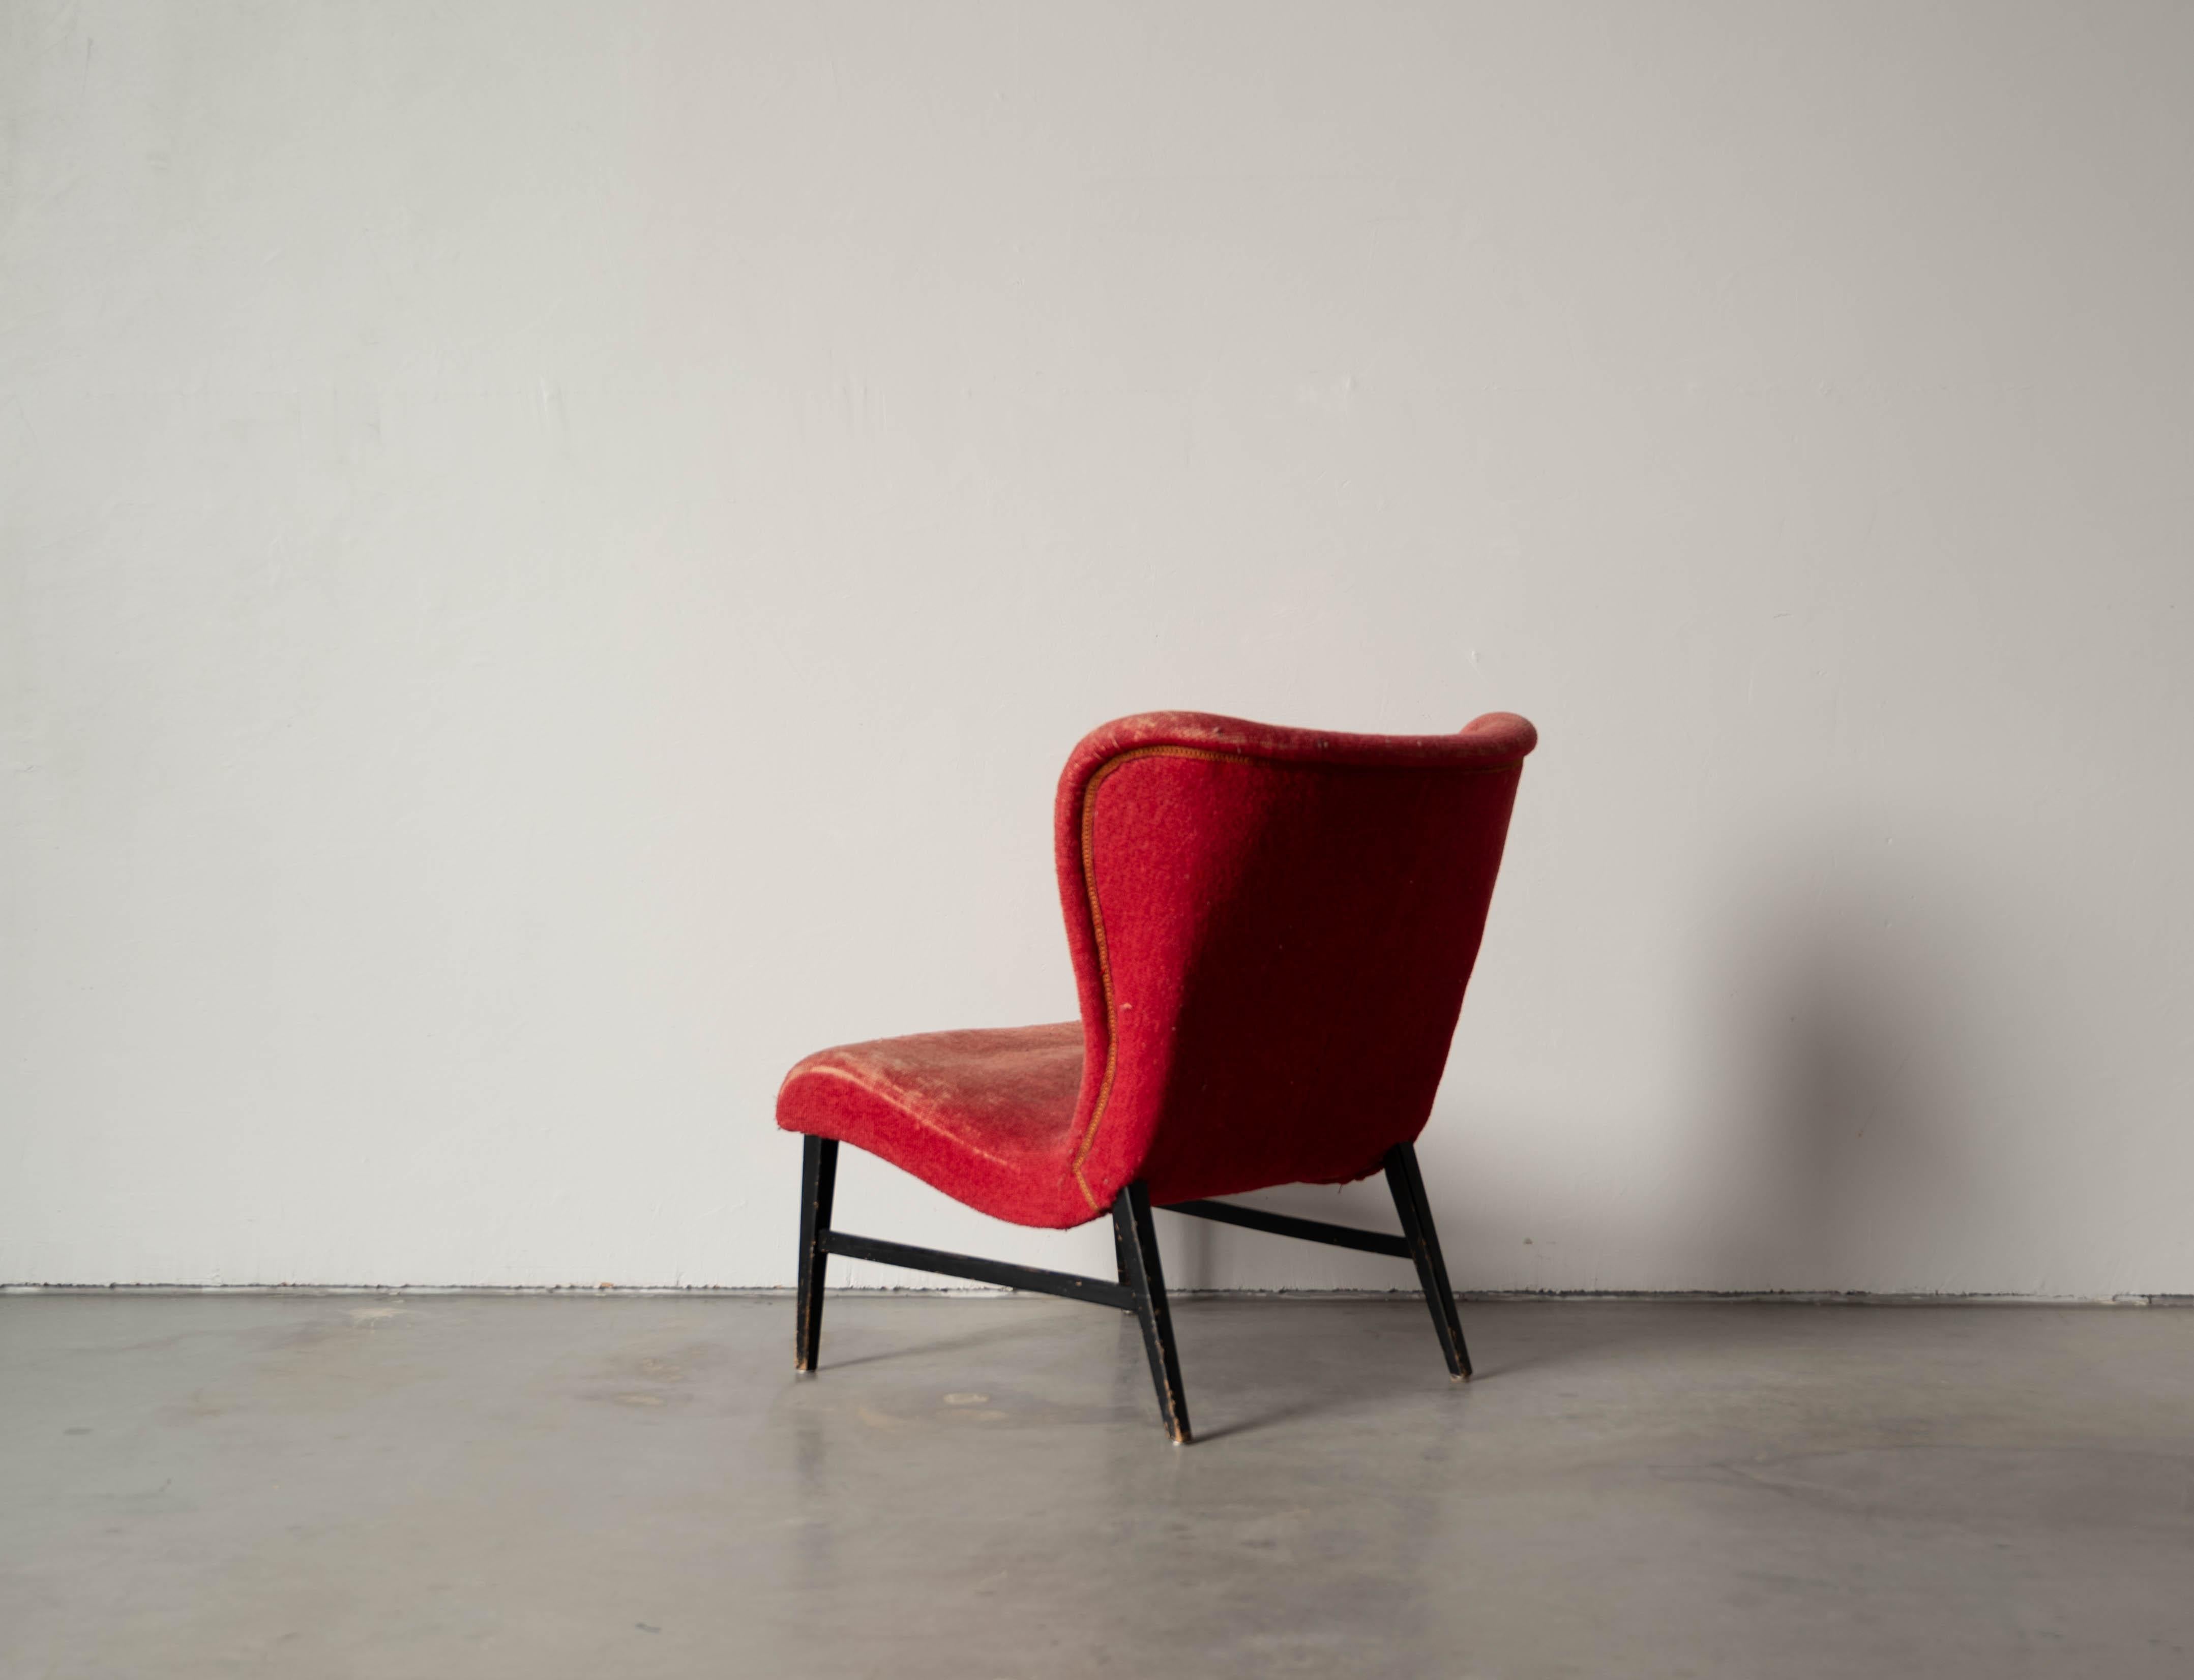 Erik Karlén 'Attributed' Slipper Chair, Red Velvet, Wood, Sweden, 1940s In Fair Condition For Sale In High Point, NC